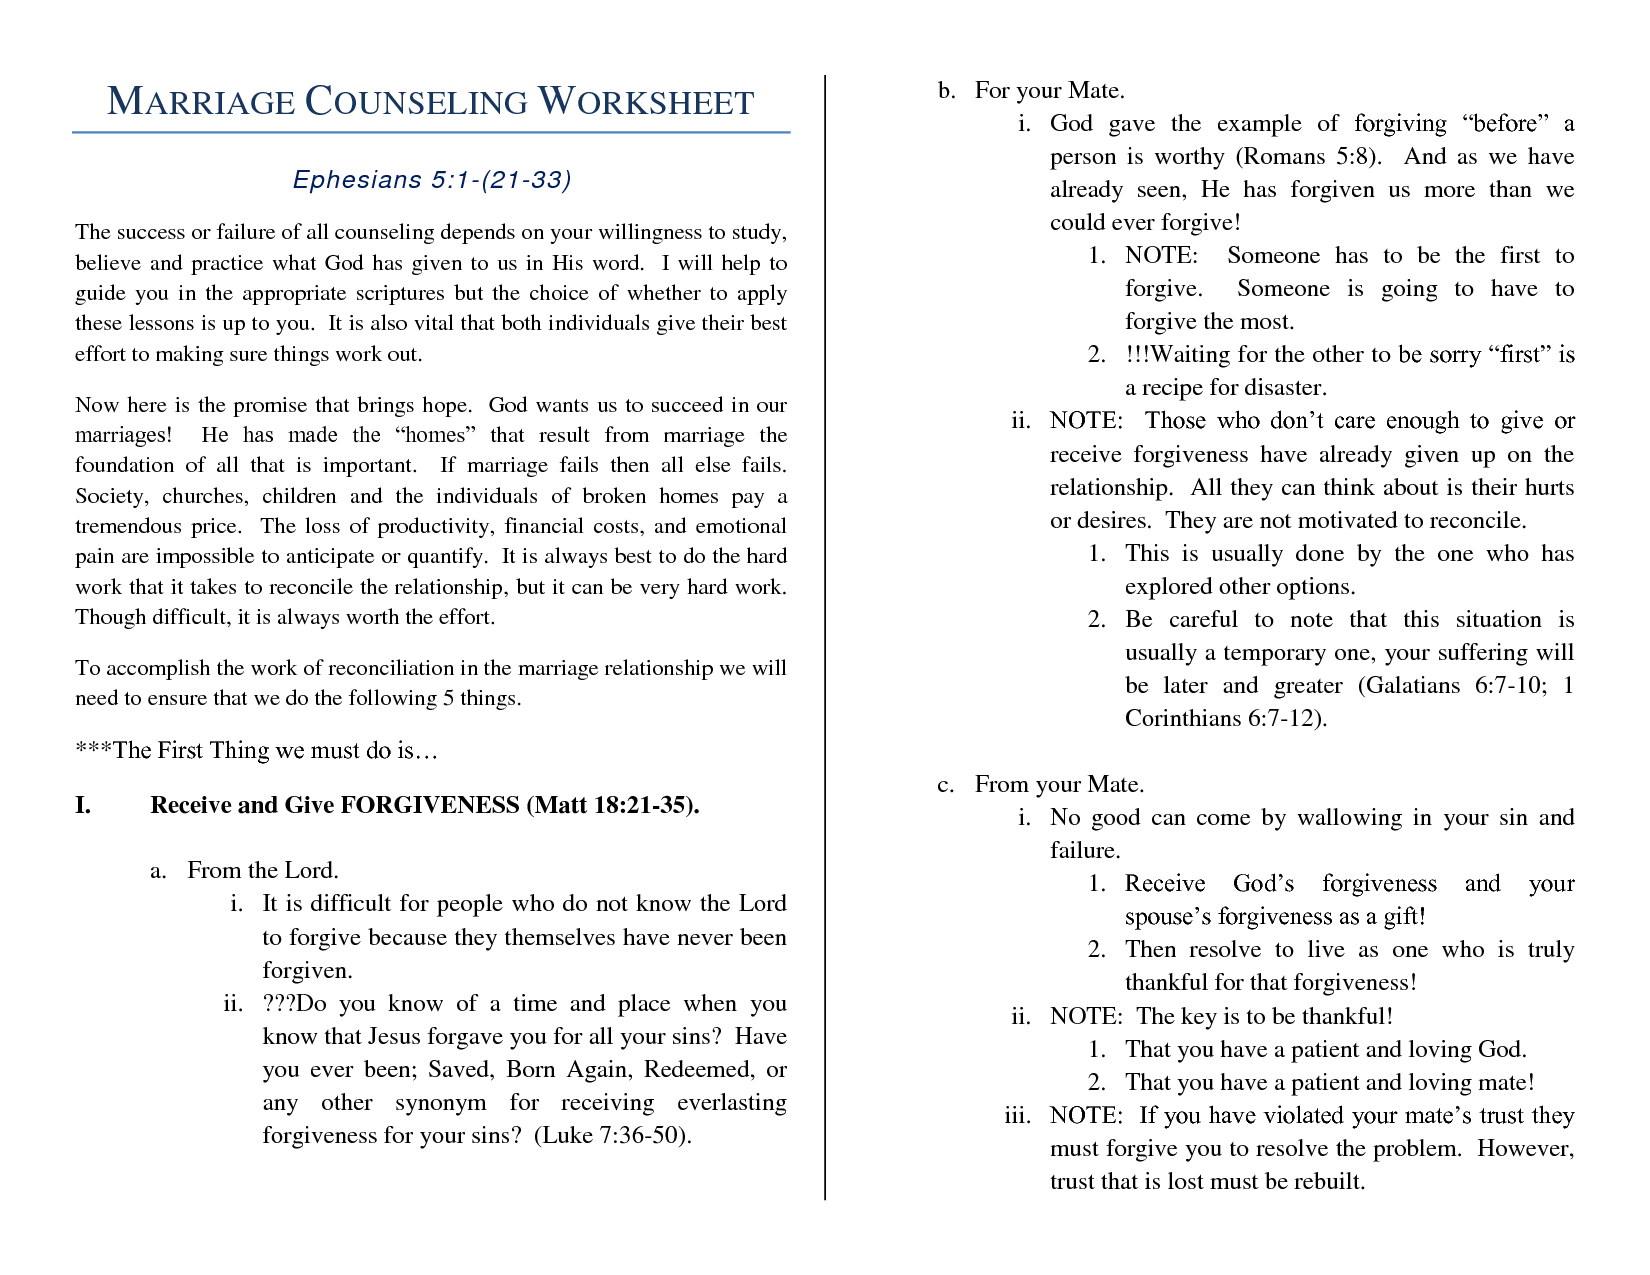 14 Best Images of Marriage Communication Worksheets  Printable Marriage Counseling Worksheets 